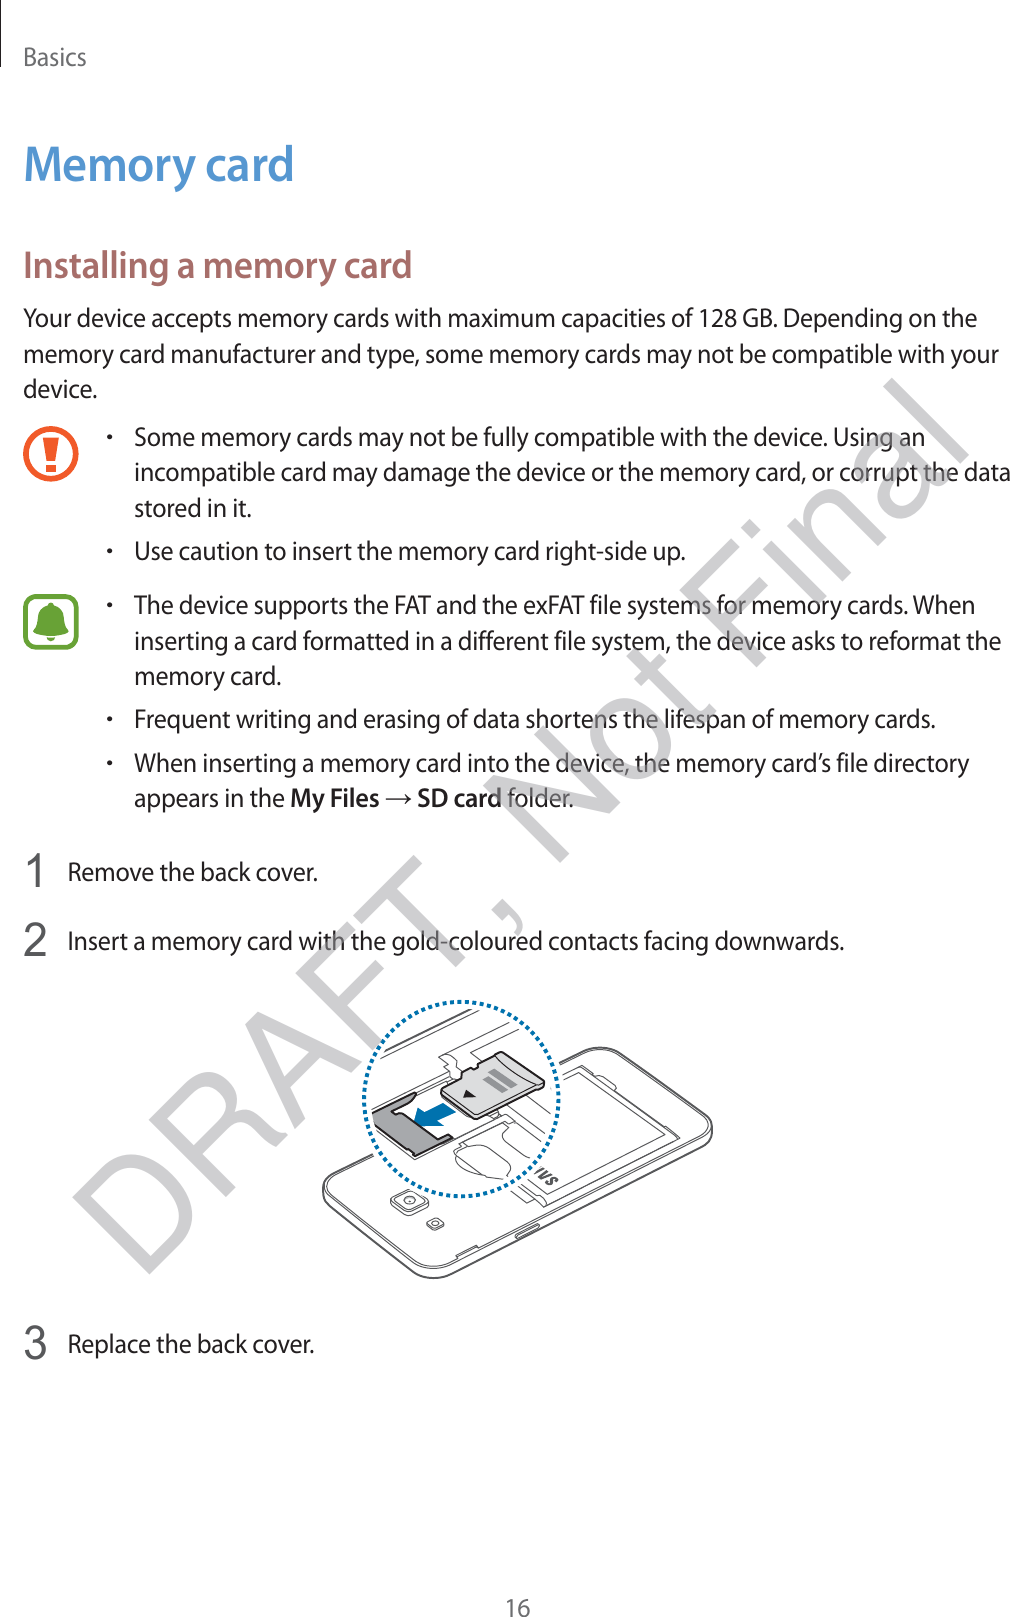 Basics16Memory cardInstalling a memory cardYour device accepts memory cards with maximum capacities of 128 GB. Depending on the memory card manufacturer and type, some memory cards may not be compatible with your device.rSome memory cards may not be fully compatible with the device. Using an incompatible card may damage the device or the memory card, or corrupt the data stored in it.rUse caution to insert the memory card right-side up.rThe device supports the FAT and the exFAT file systems for memory cards. When inserting a card formatted in a different file system, the device asks to reformat the memory card.rFrequent writing and erasing of data shortens the lifespan of memory cards.rWhen inserting a memory card into the device, the memory card’s file directory appears in the My Files → SD card folder.1 Remove the back cover.2 Insert a memory card with the gold-coloured contacts facing downwards.3 Replace the back cover.DRAFT, Not Final